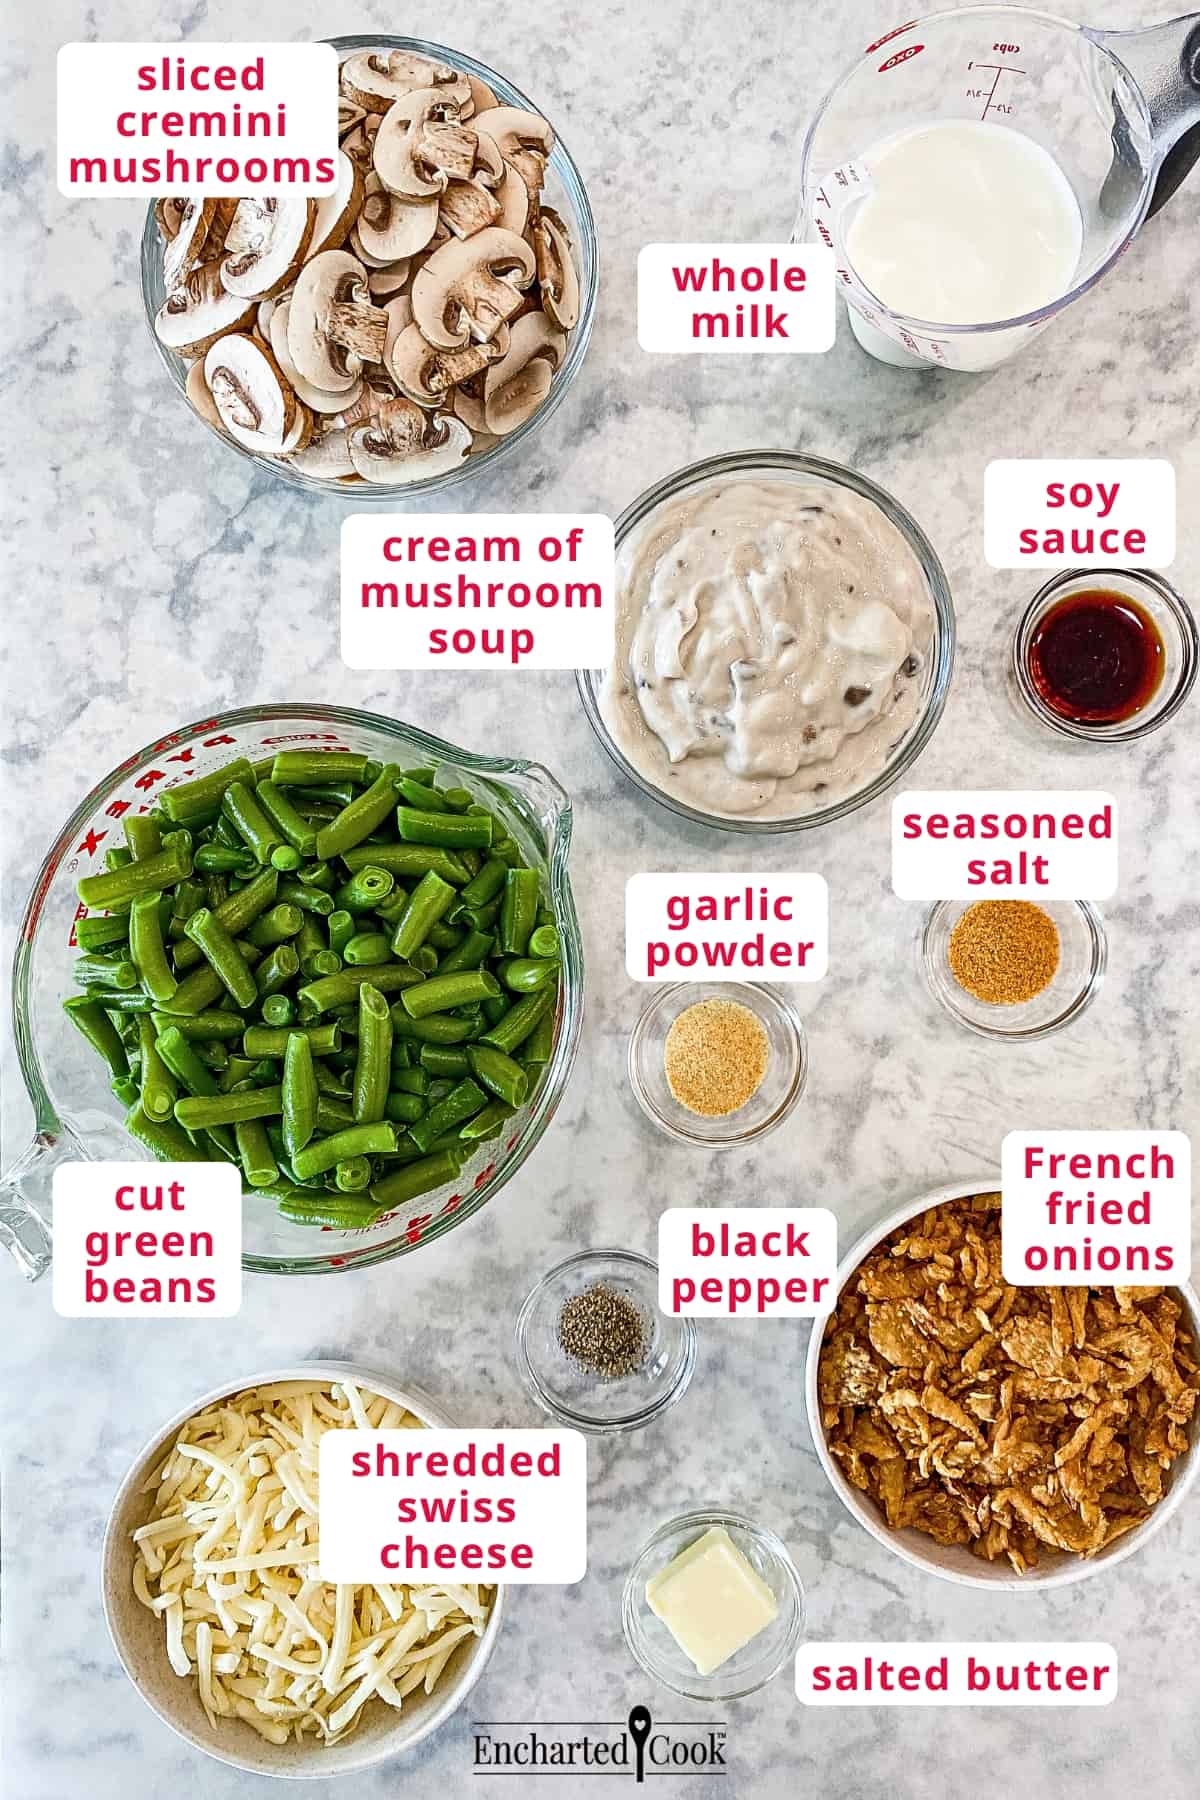 The ingredients: sliced cremini mushrooms, whole milk, cream of mushroom soup, soy sauce, seasoned salt, garlic powder, black pepper, French fried onions, salted butter, shredded Swiss cheese, and cut green beans.